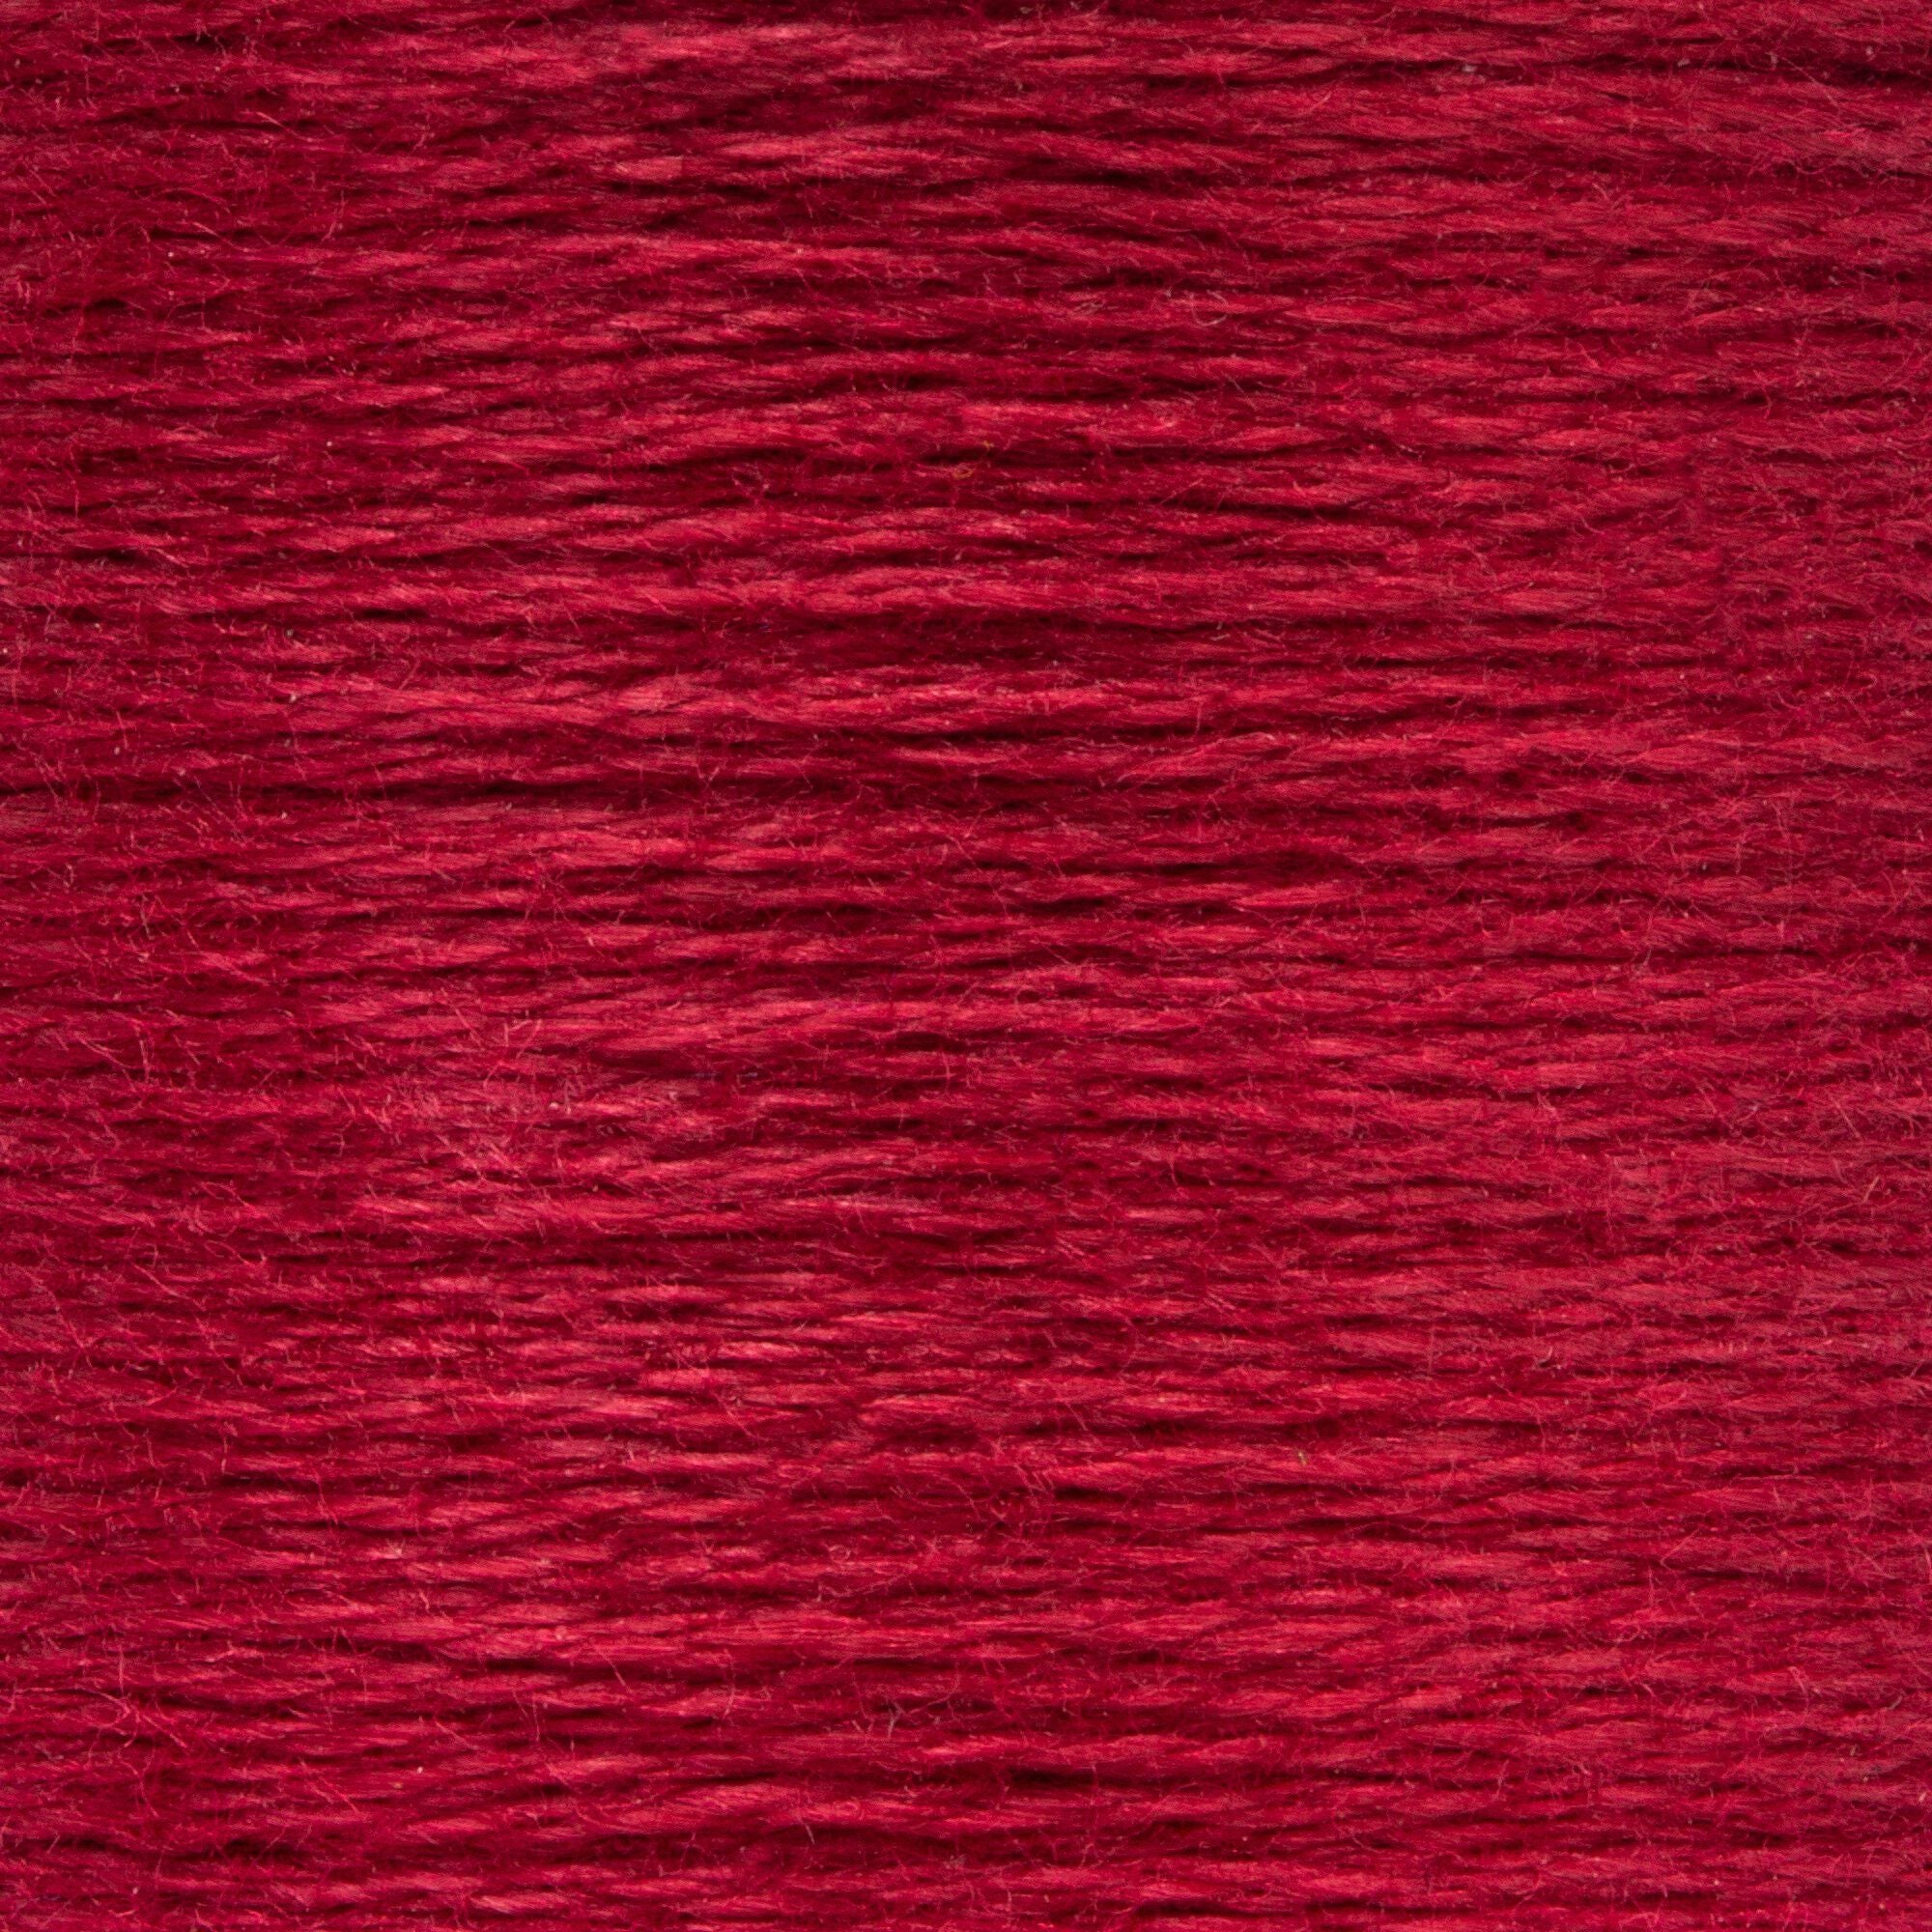 Anchor Embroidery Floss in Carmine Rose Md Dk